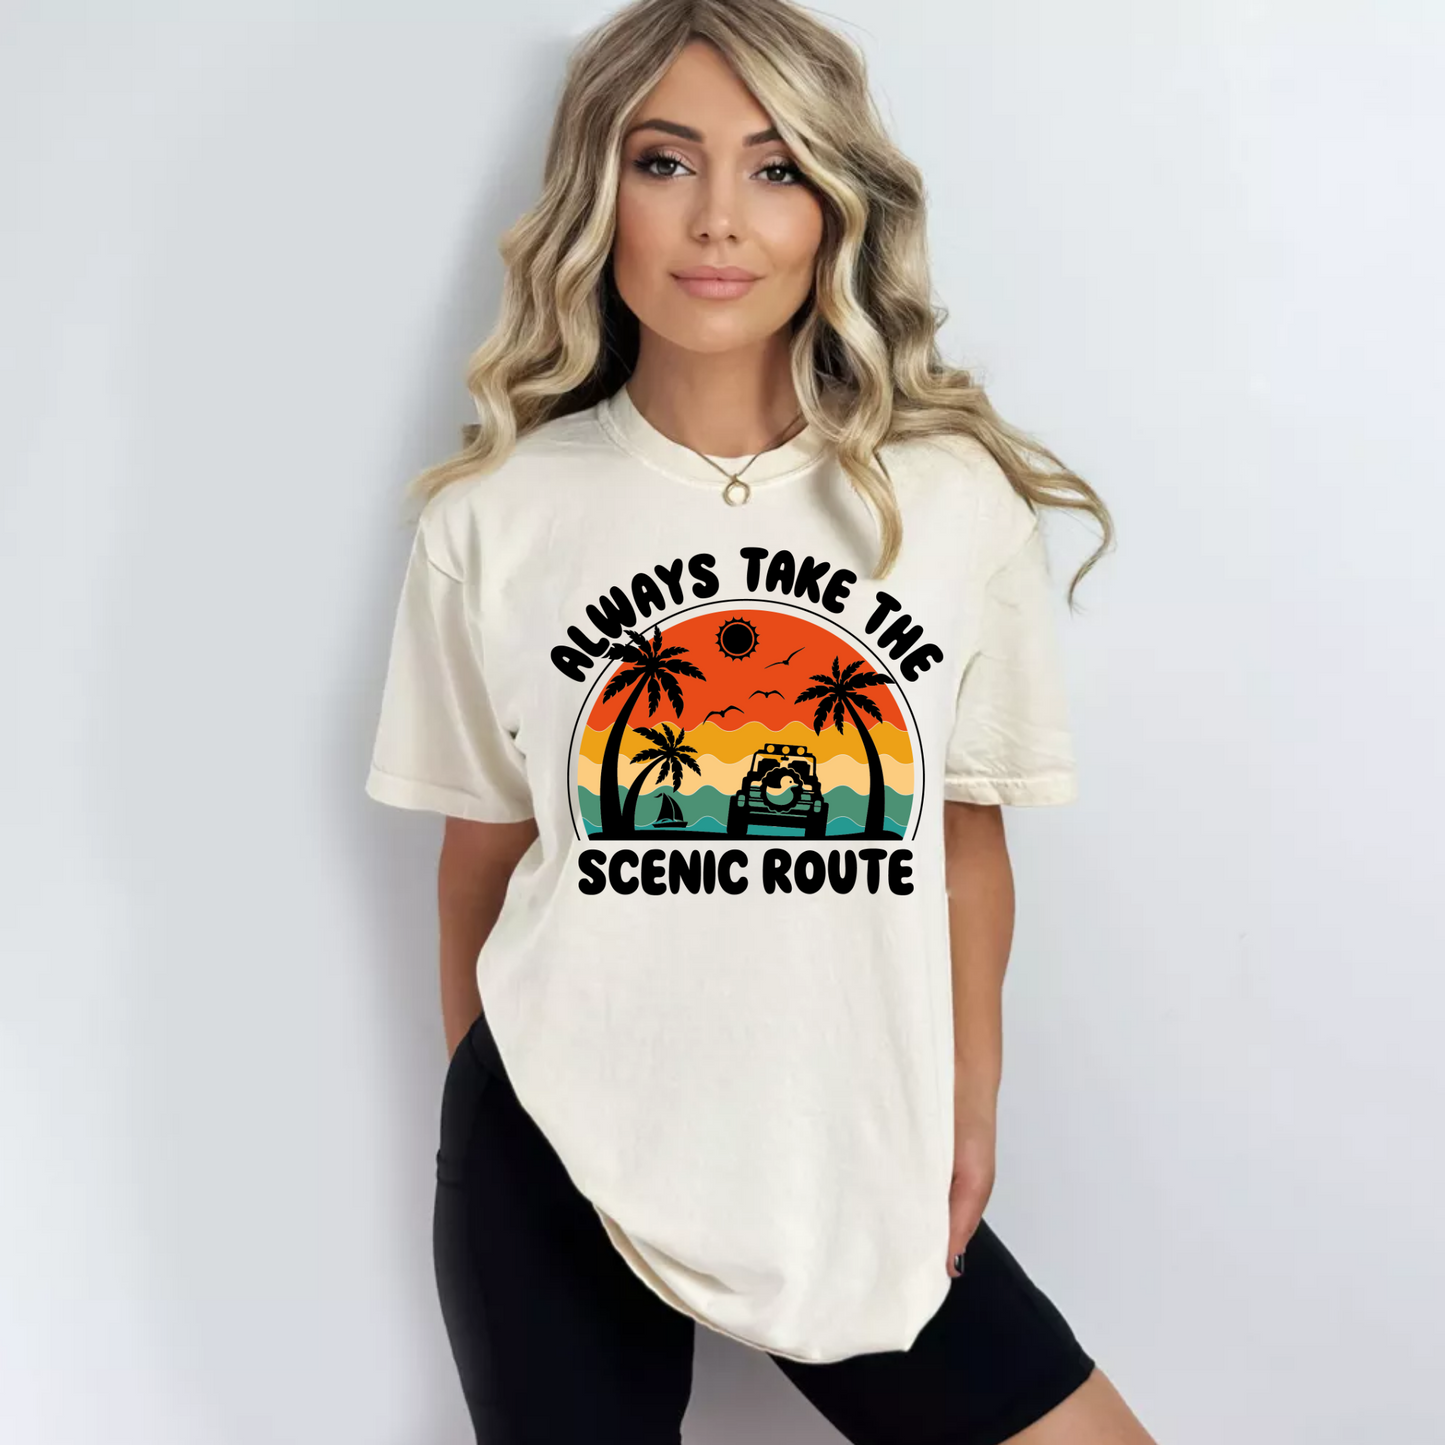 (shirt not included) Always take the scenic route - Clear Film Transfer